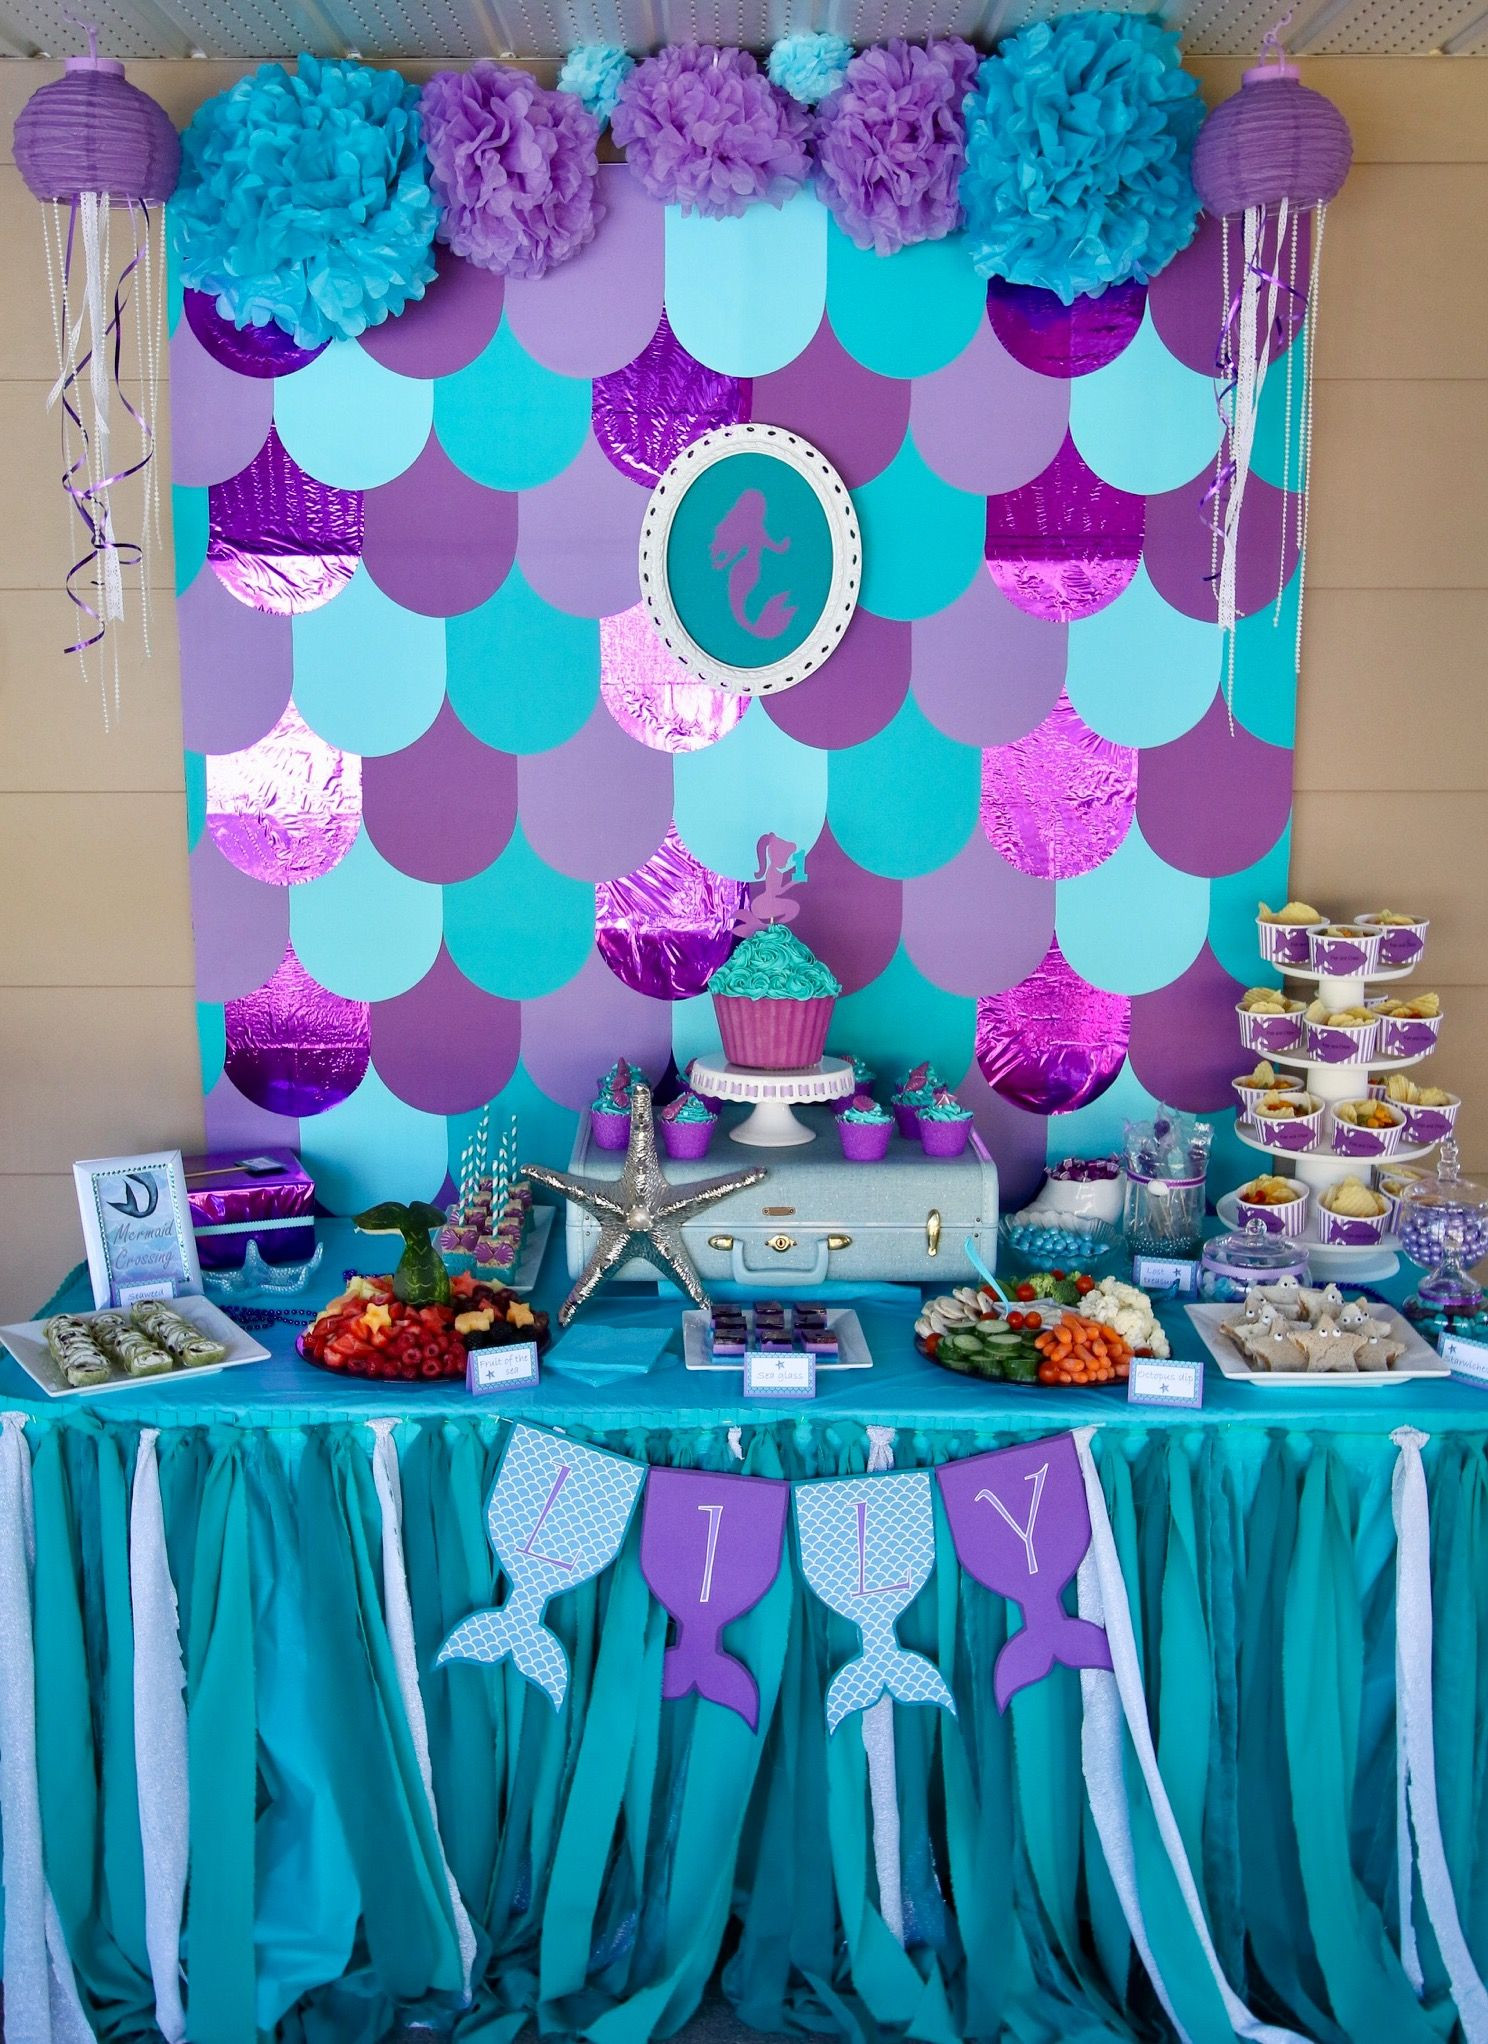 Little Mermaid Birthday Party Decoration Ideas
 Mermaid party table decorations Under the sea birthday